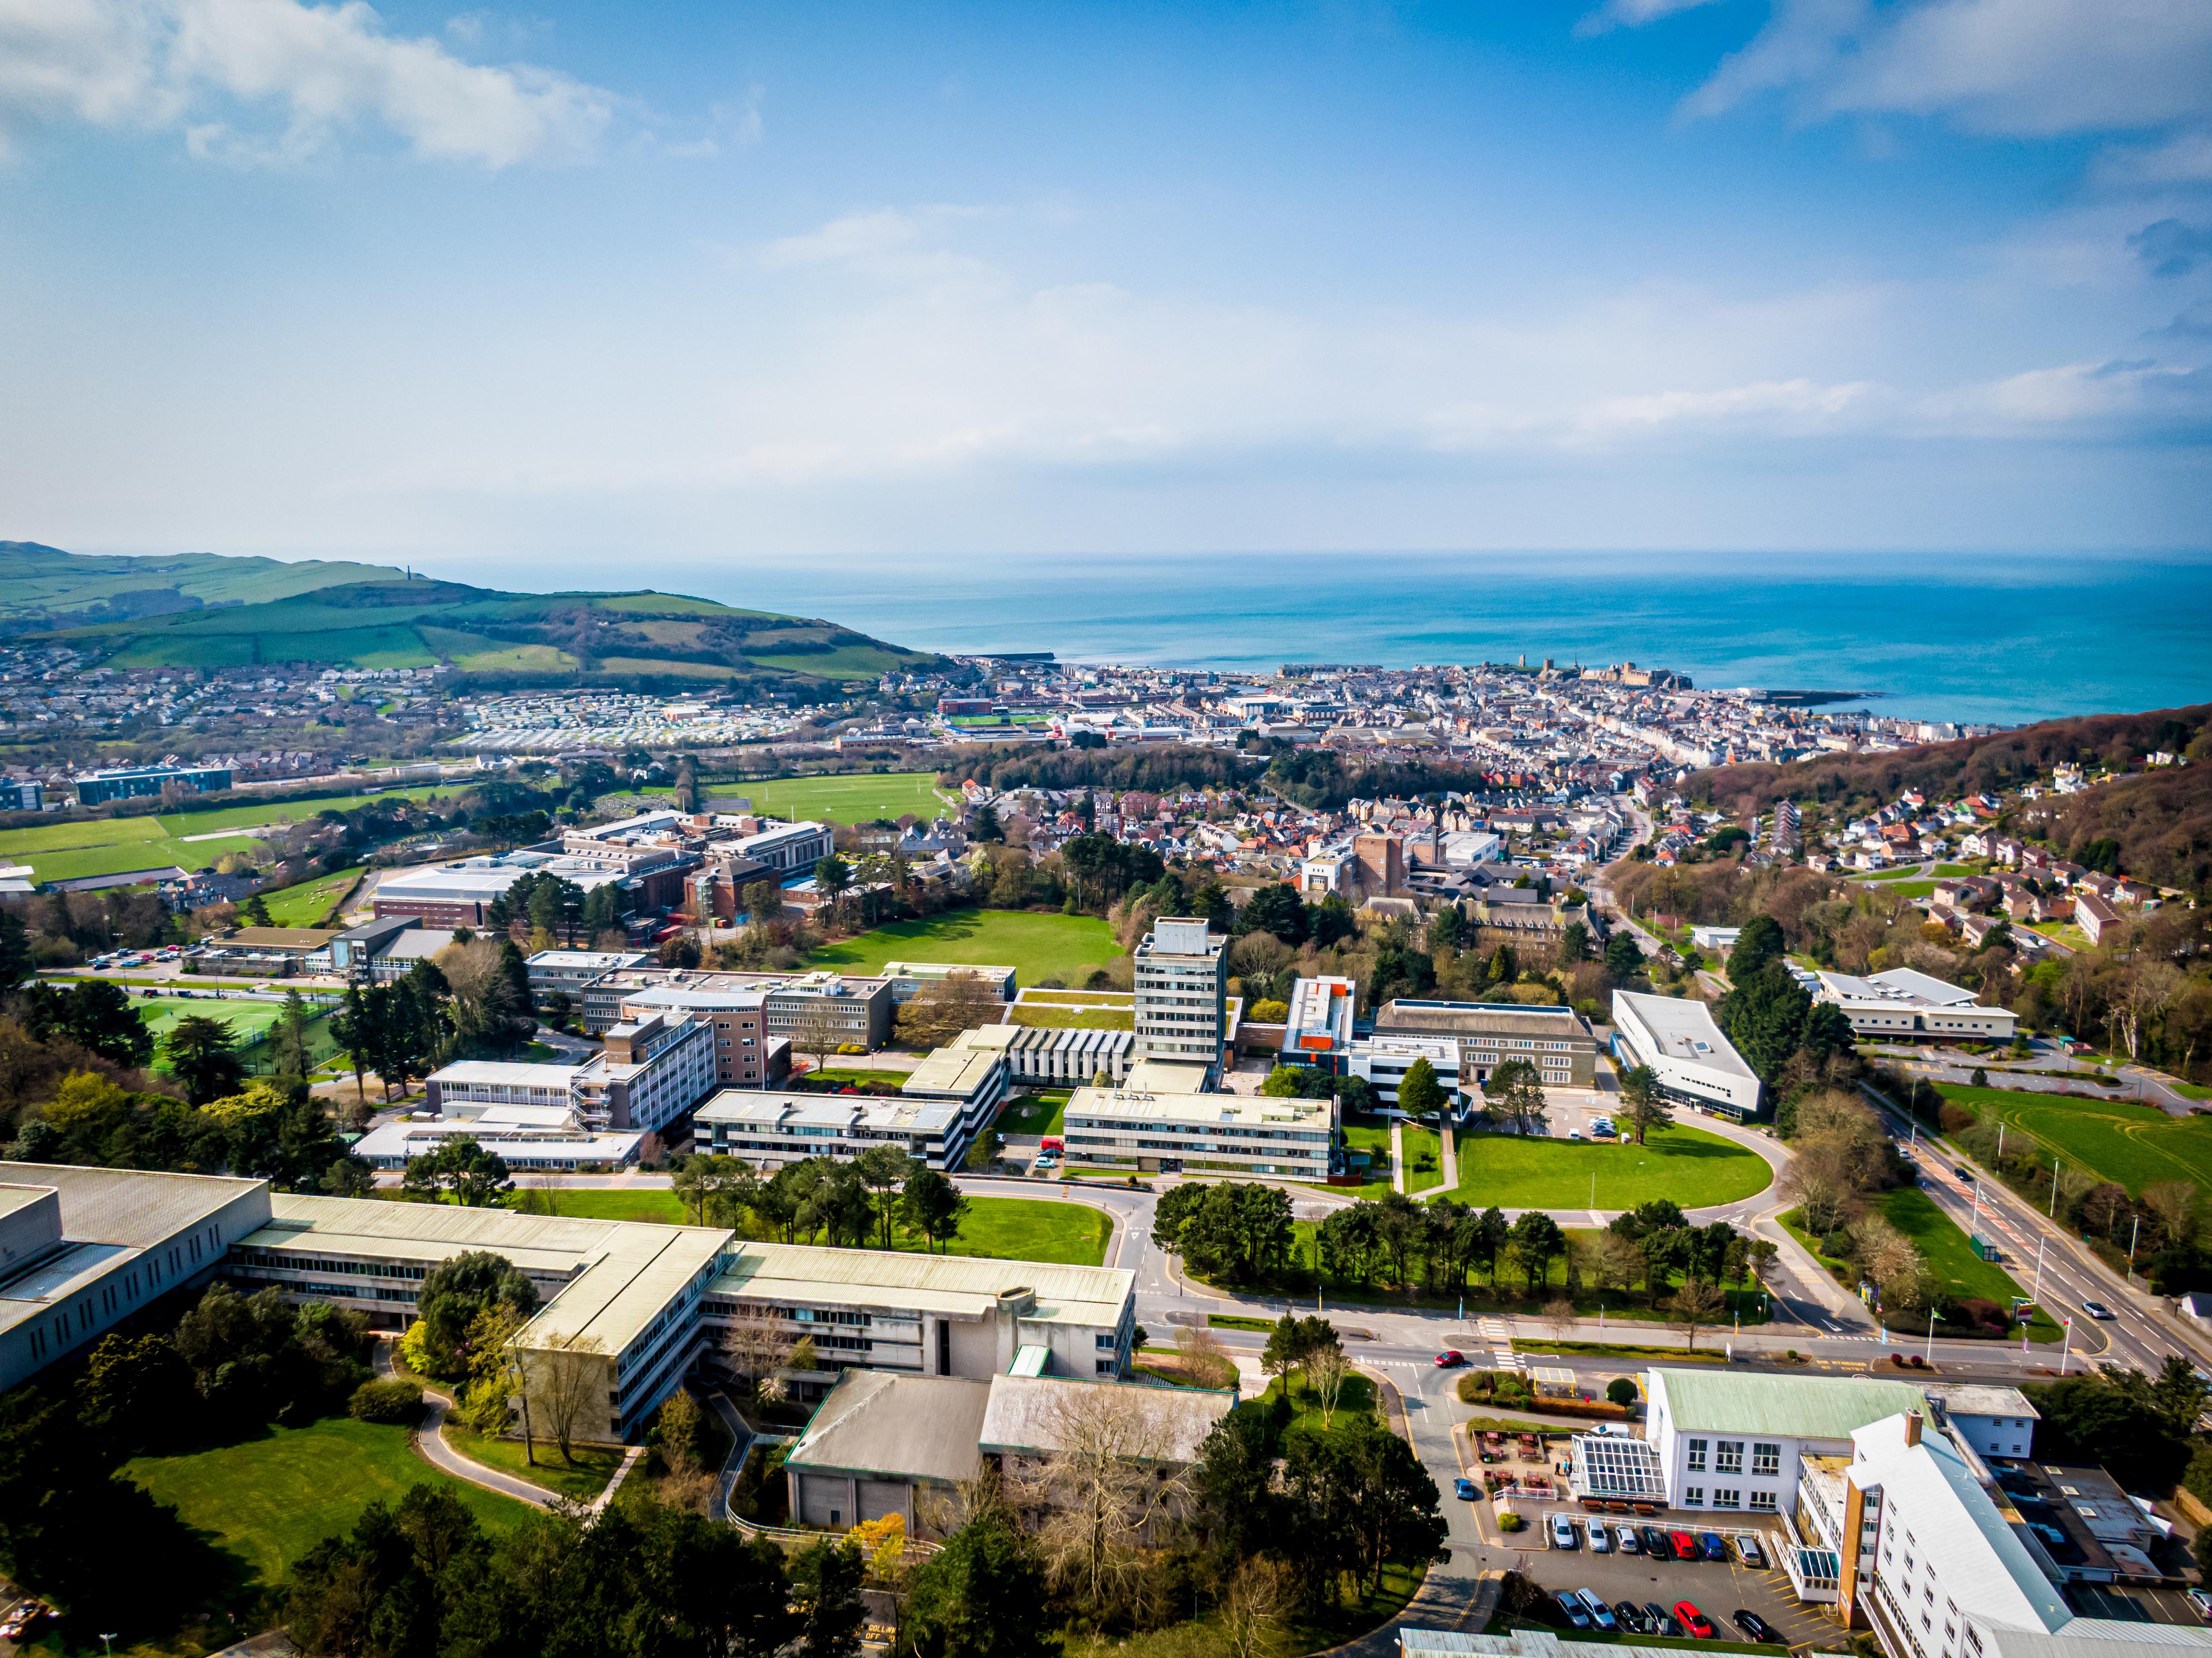 Aberystwyth University Campus from the air with the sea in the background